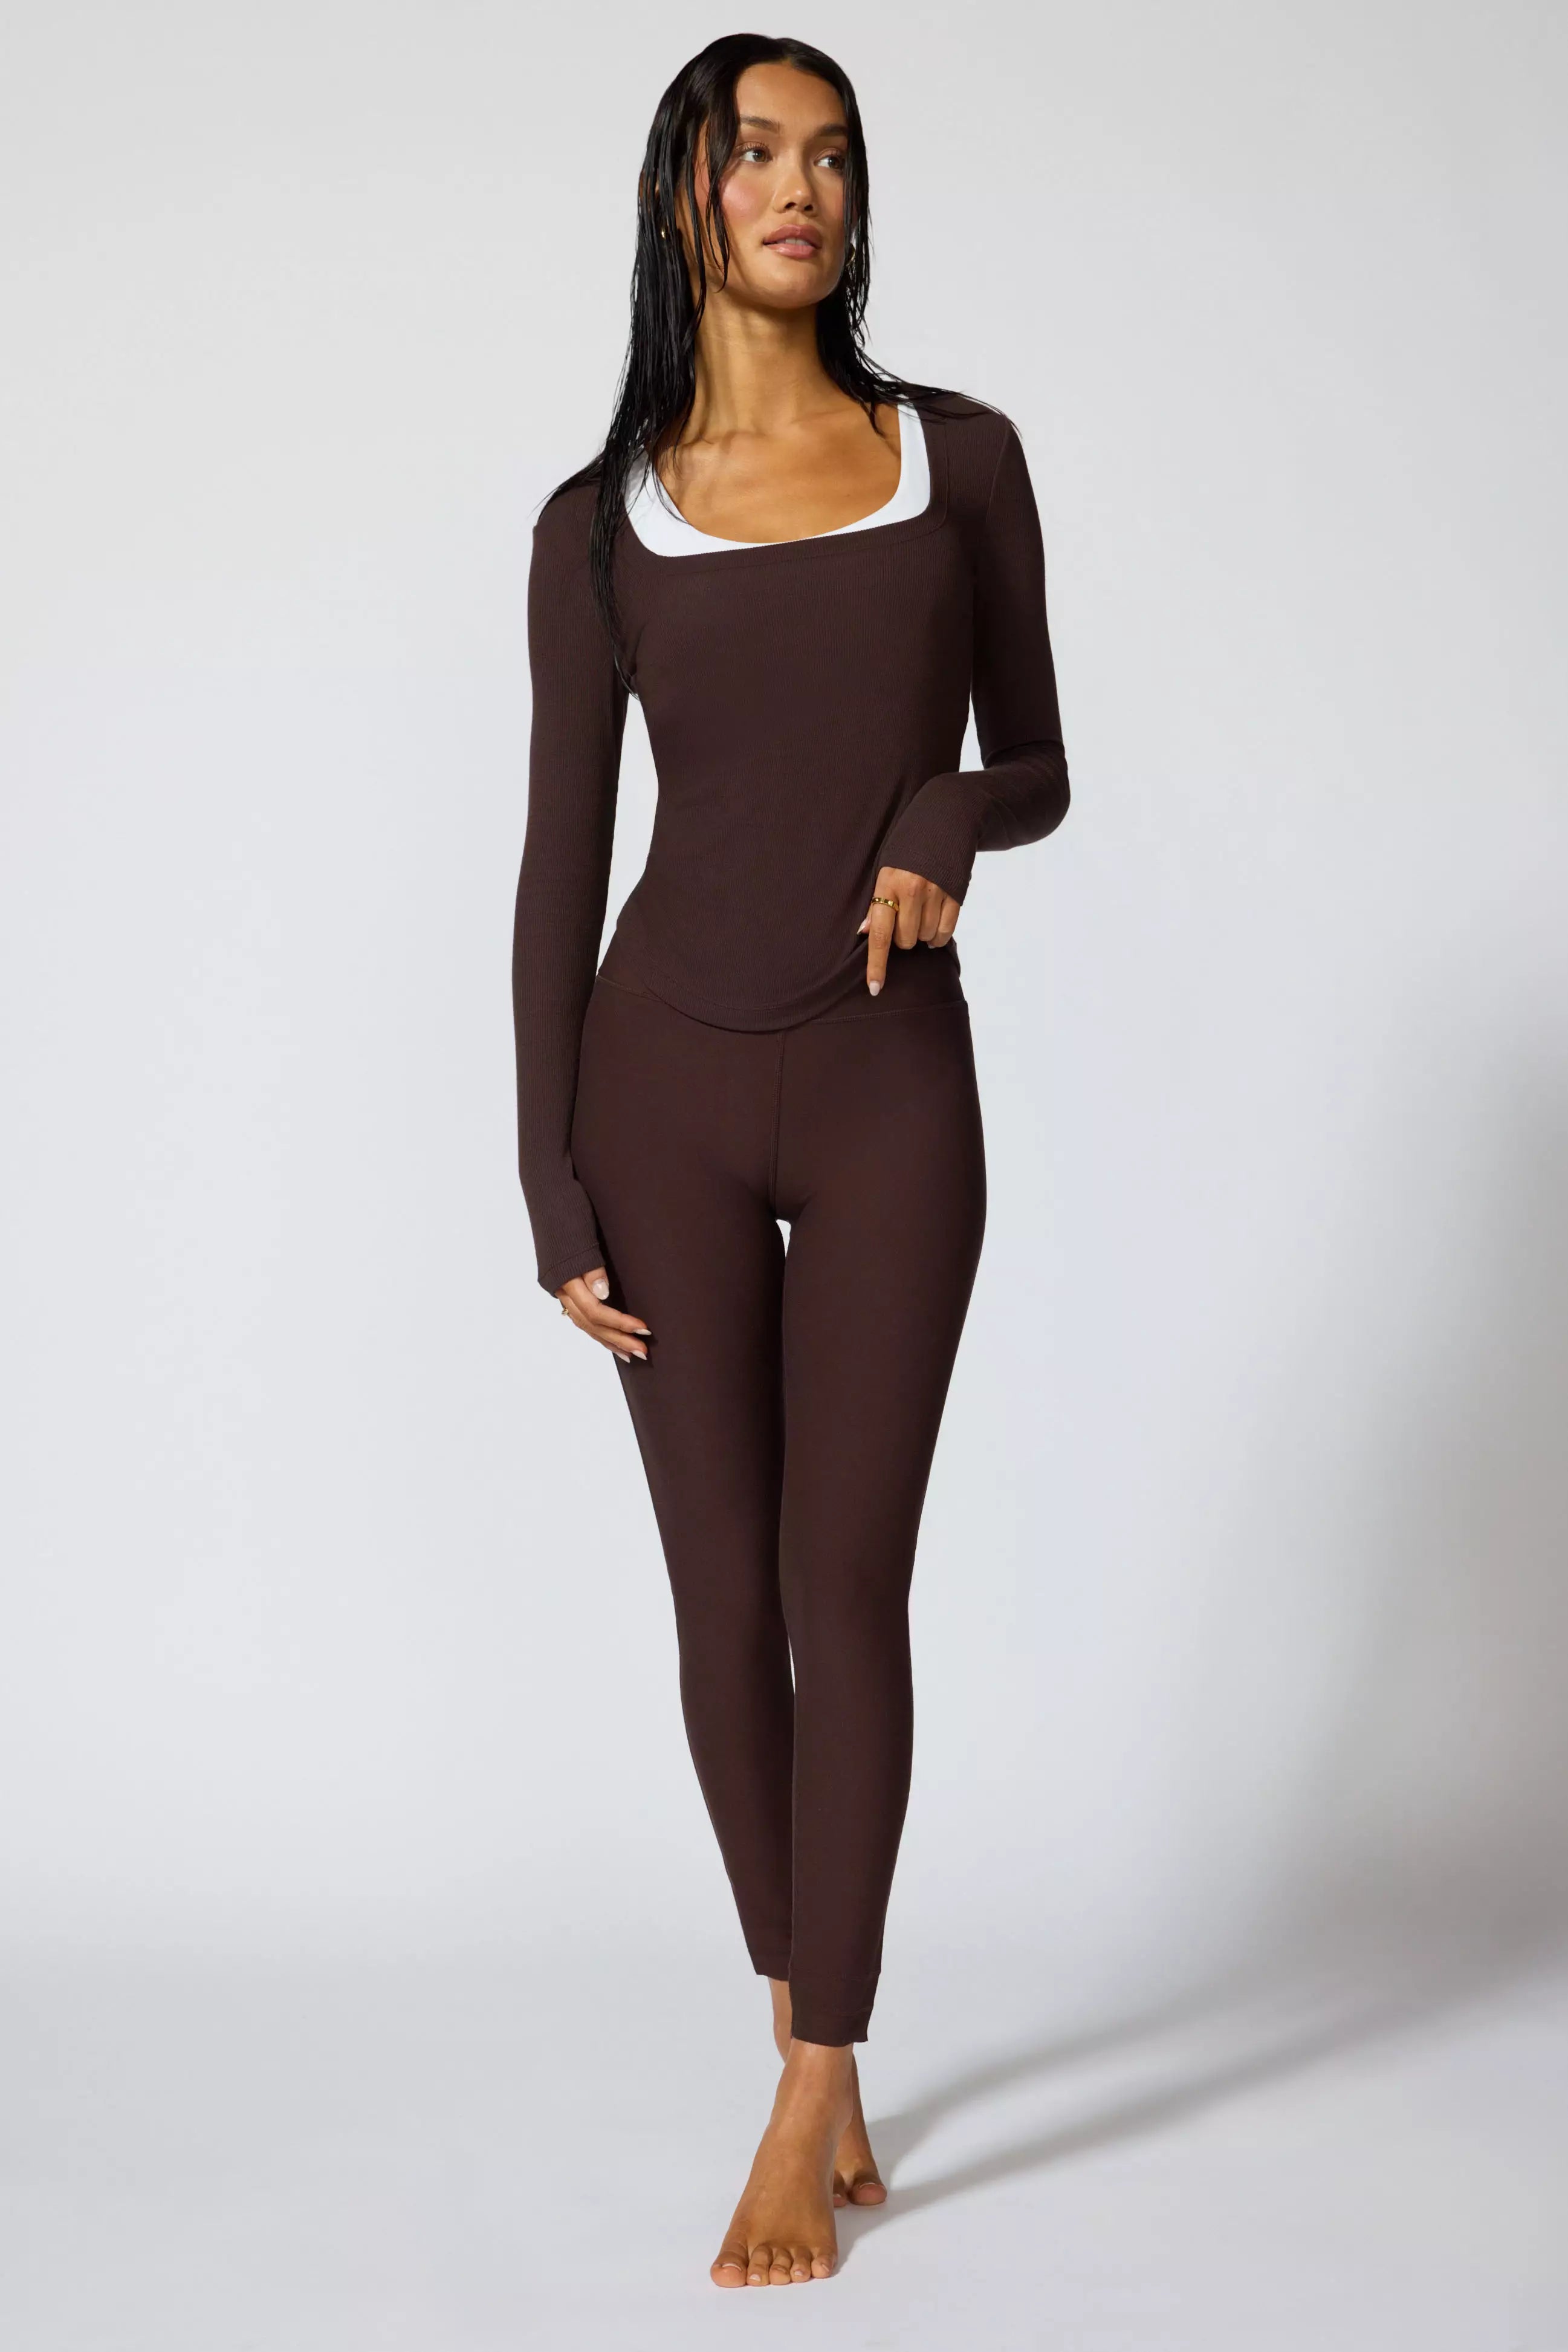 Explore High-Waisted Cut-To-Length Legging 27" Peached